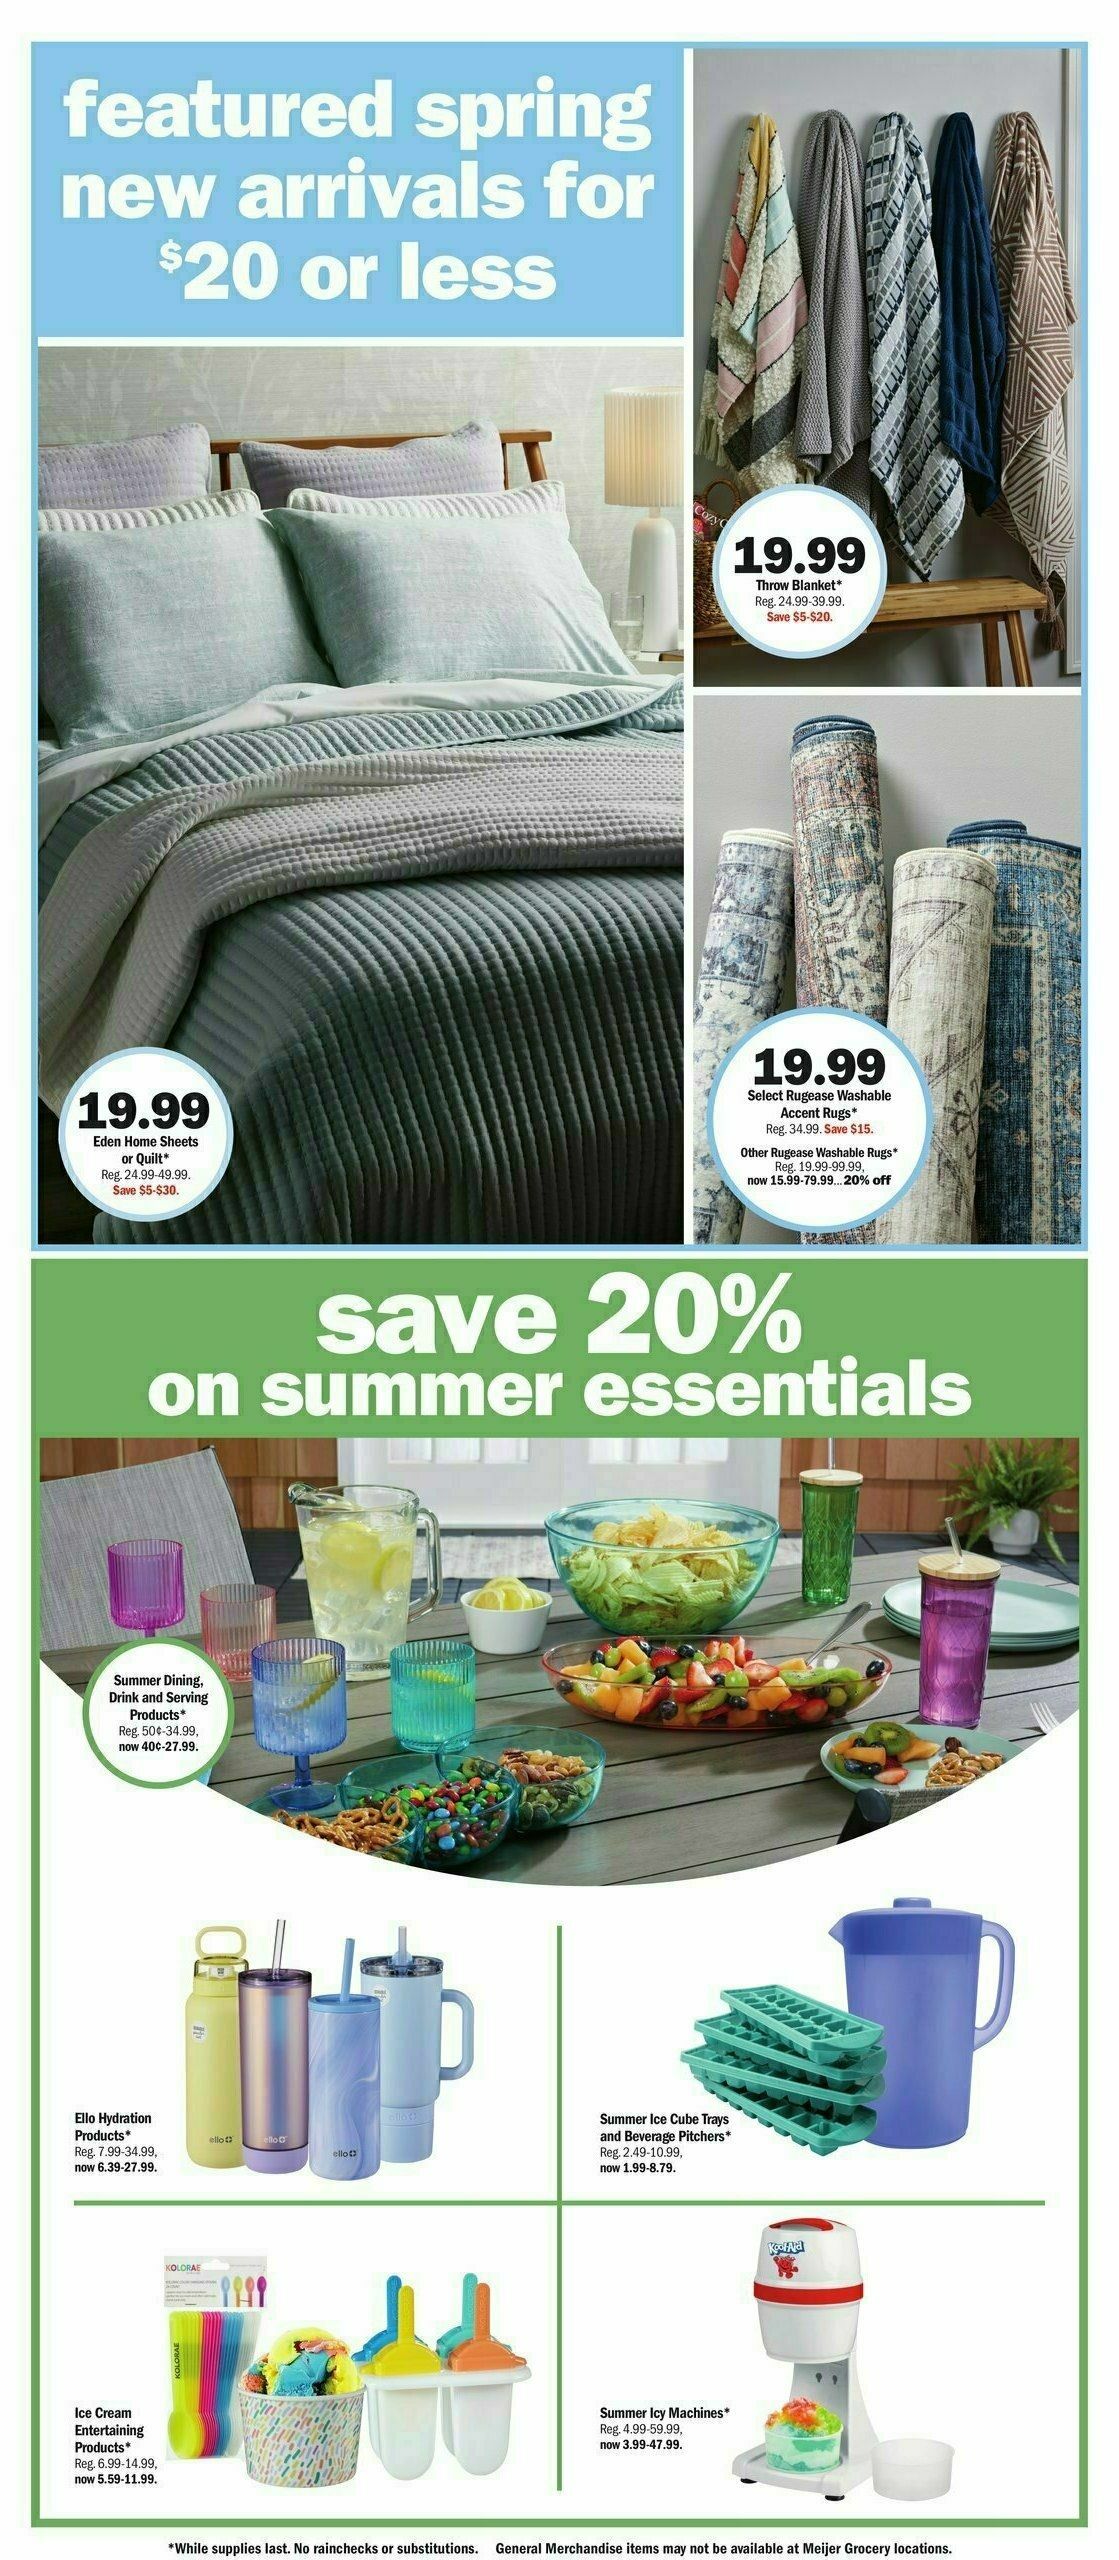 Meijer Weekly Ad from March 31